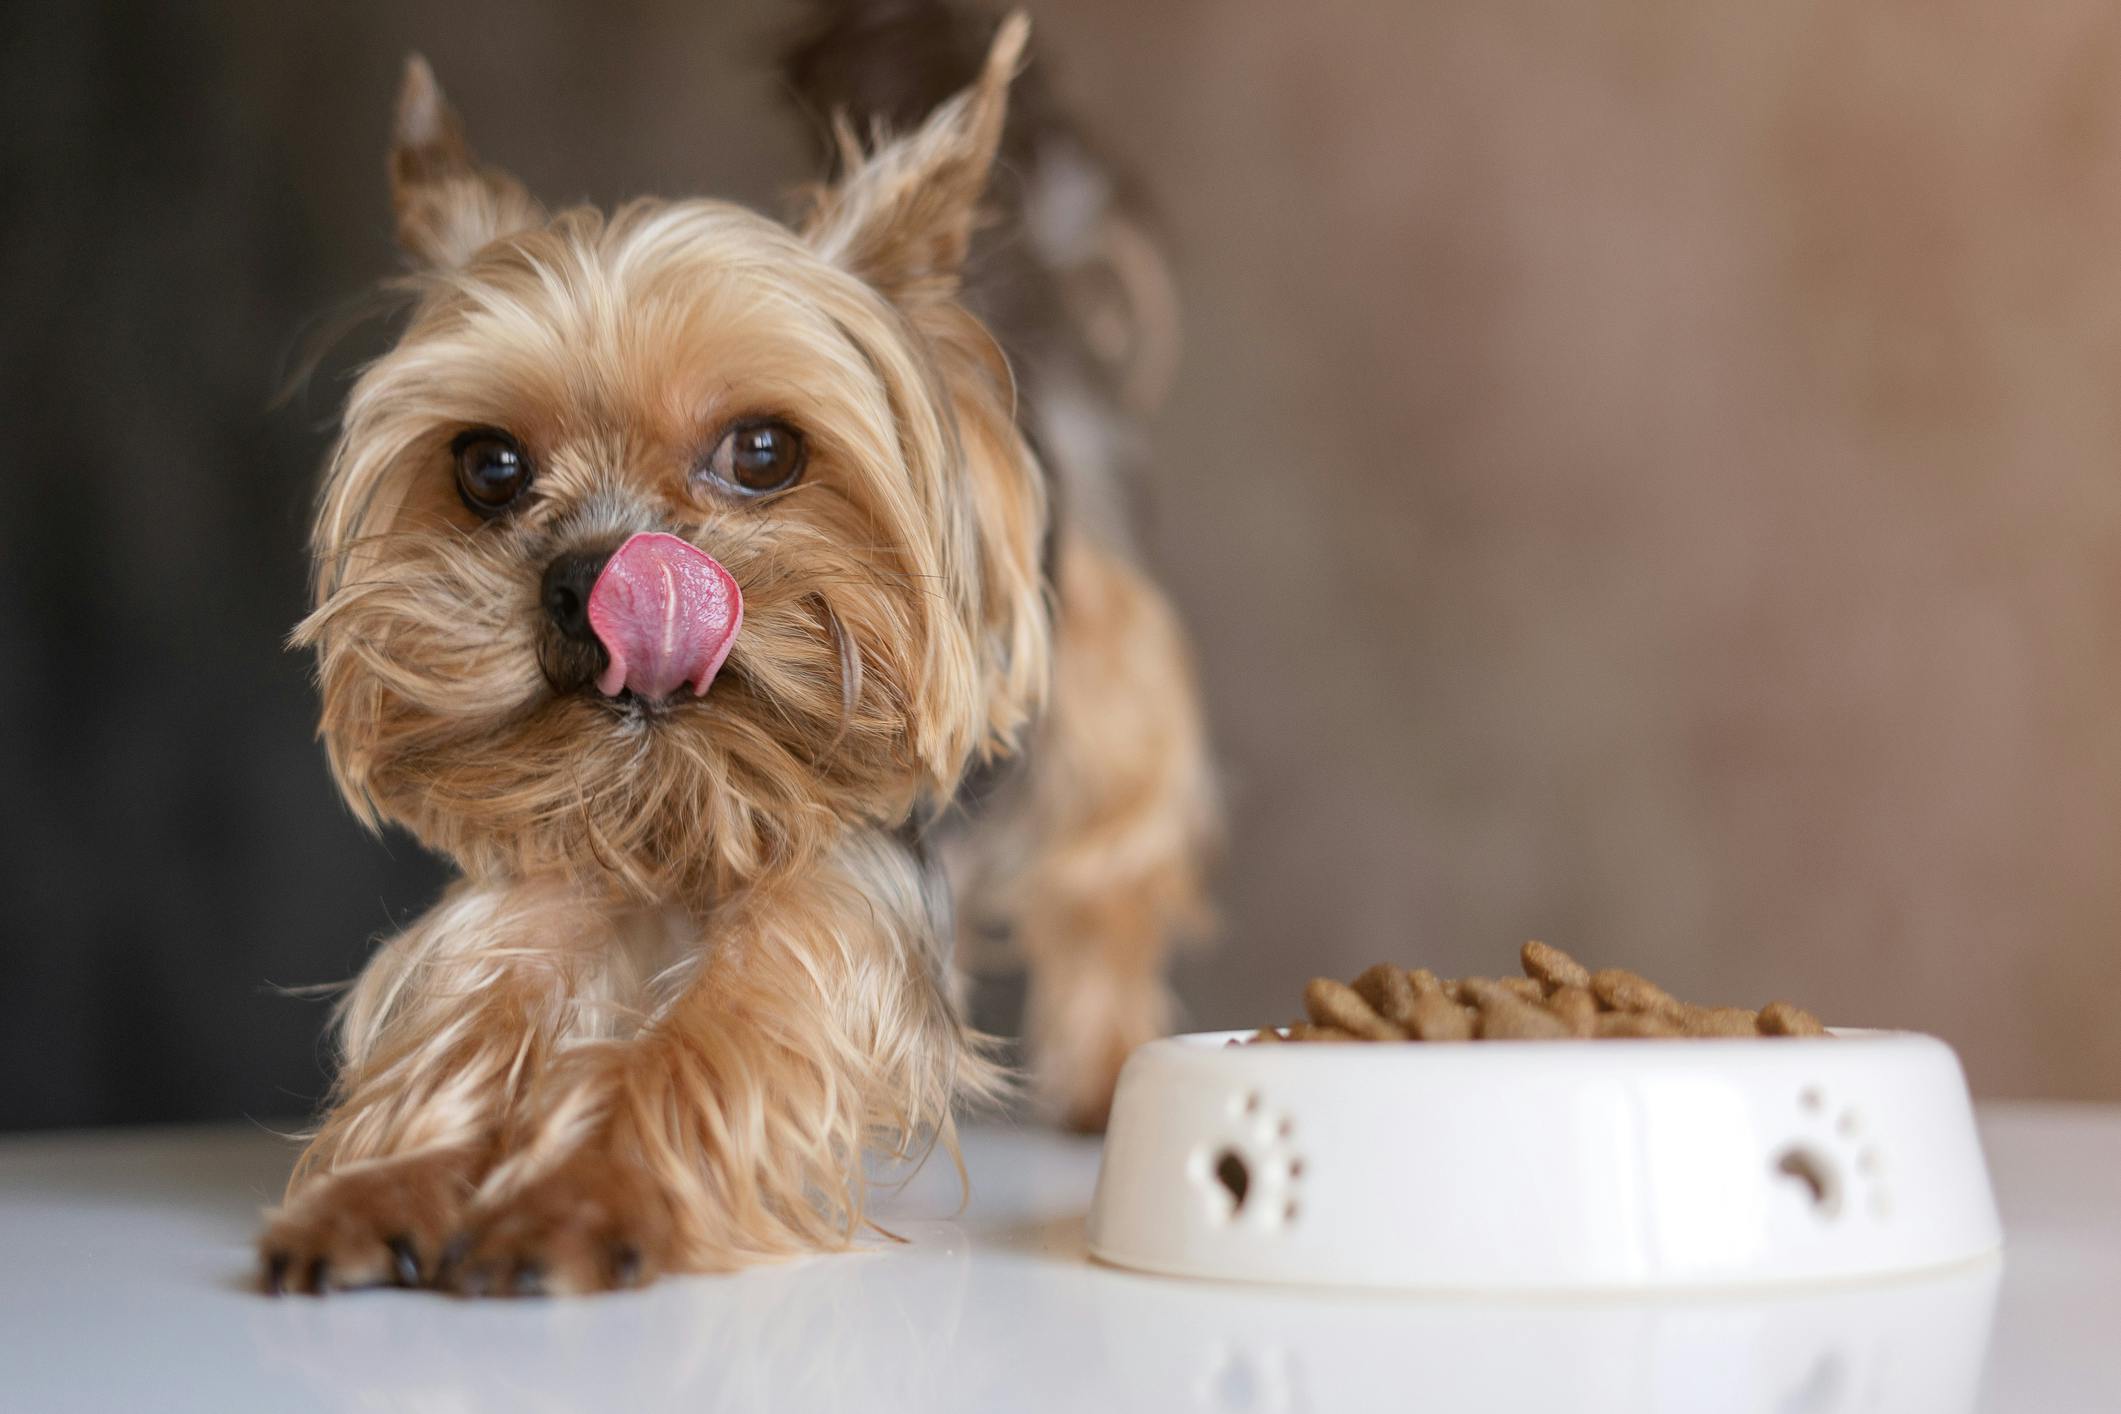 Yorkie sitting next to a full food bowl and licking their lips.